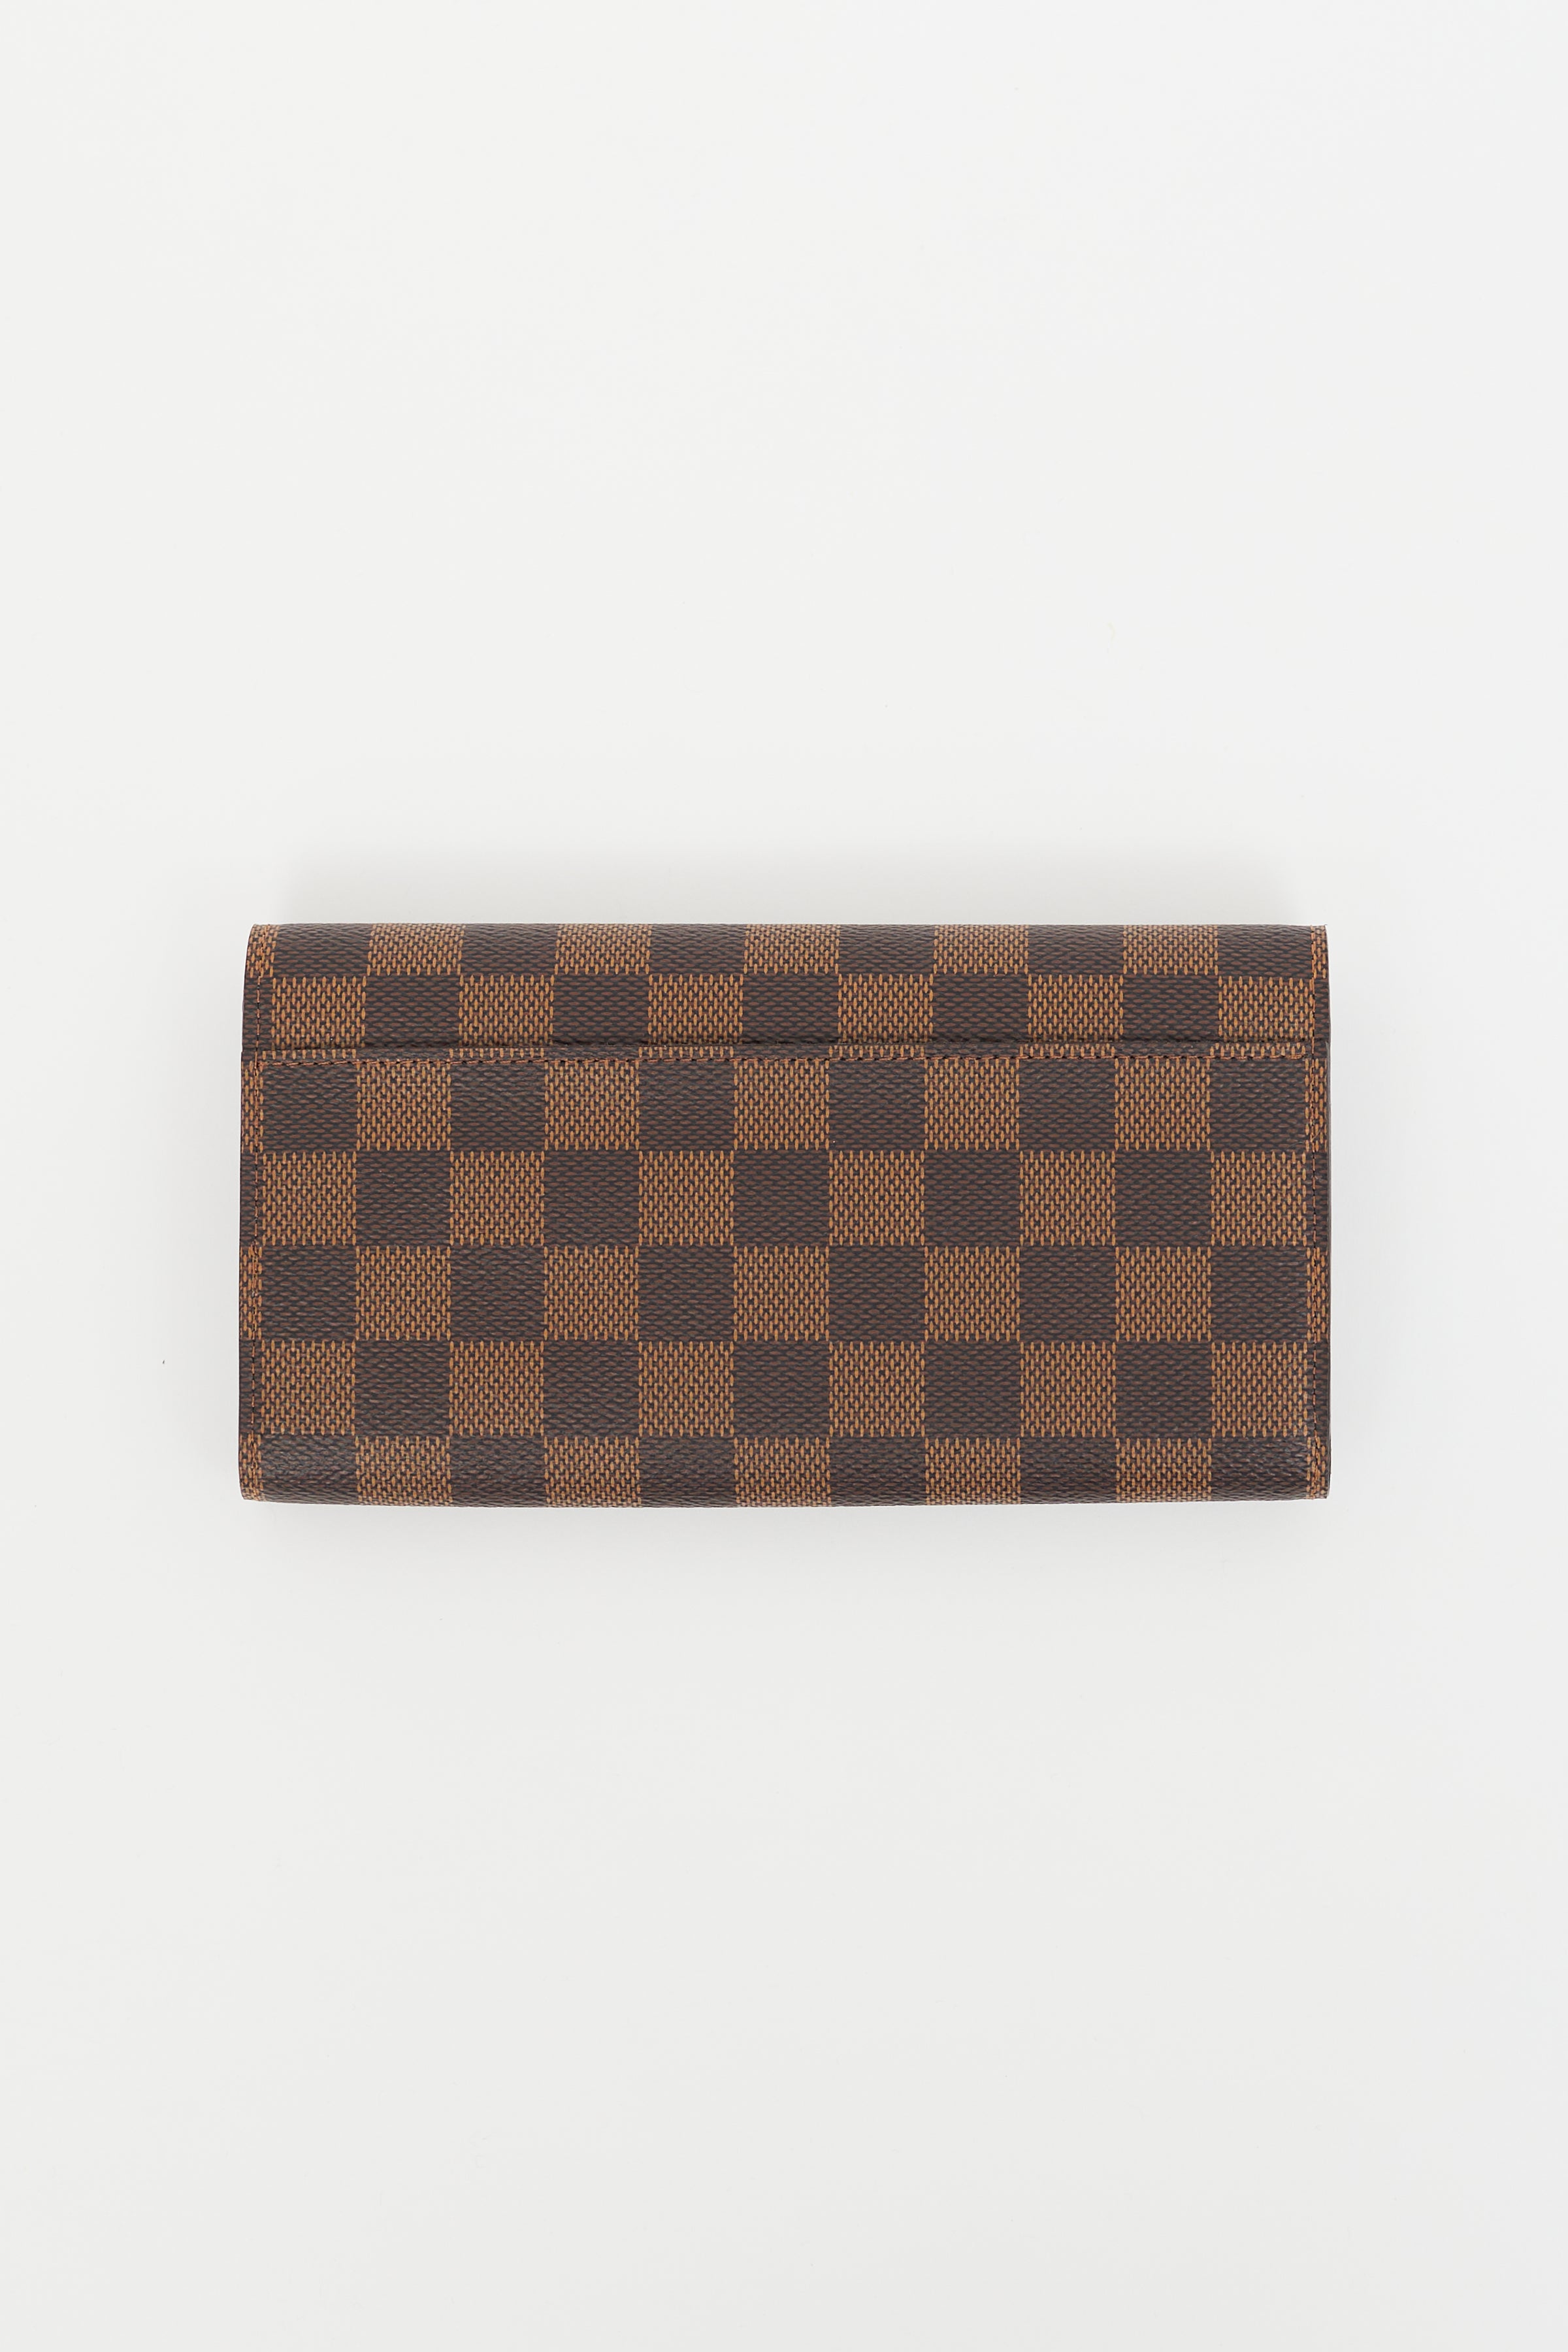 Authentic Louis Vuitton Sarah Wallet in Damier Azur Canvas - clothing &  accessories - by owner - apparel sale 